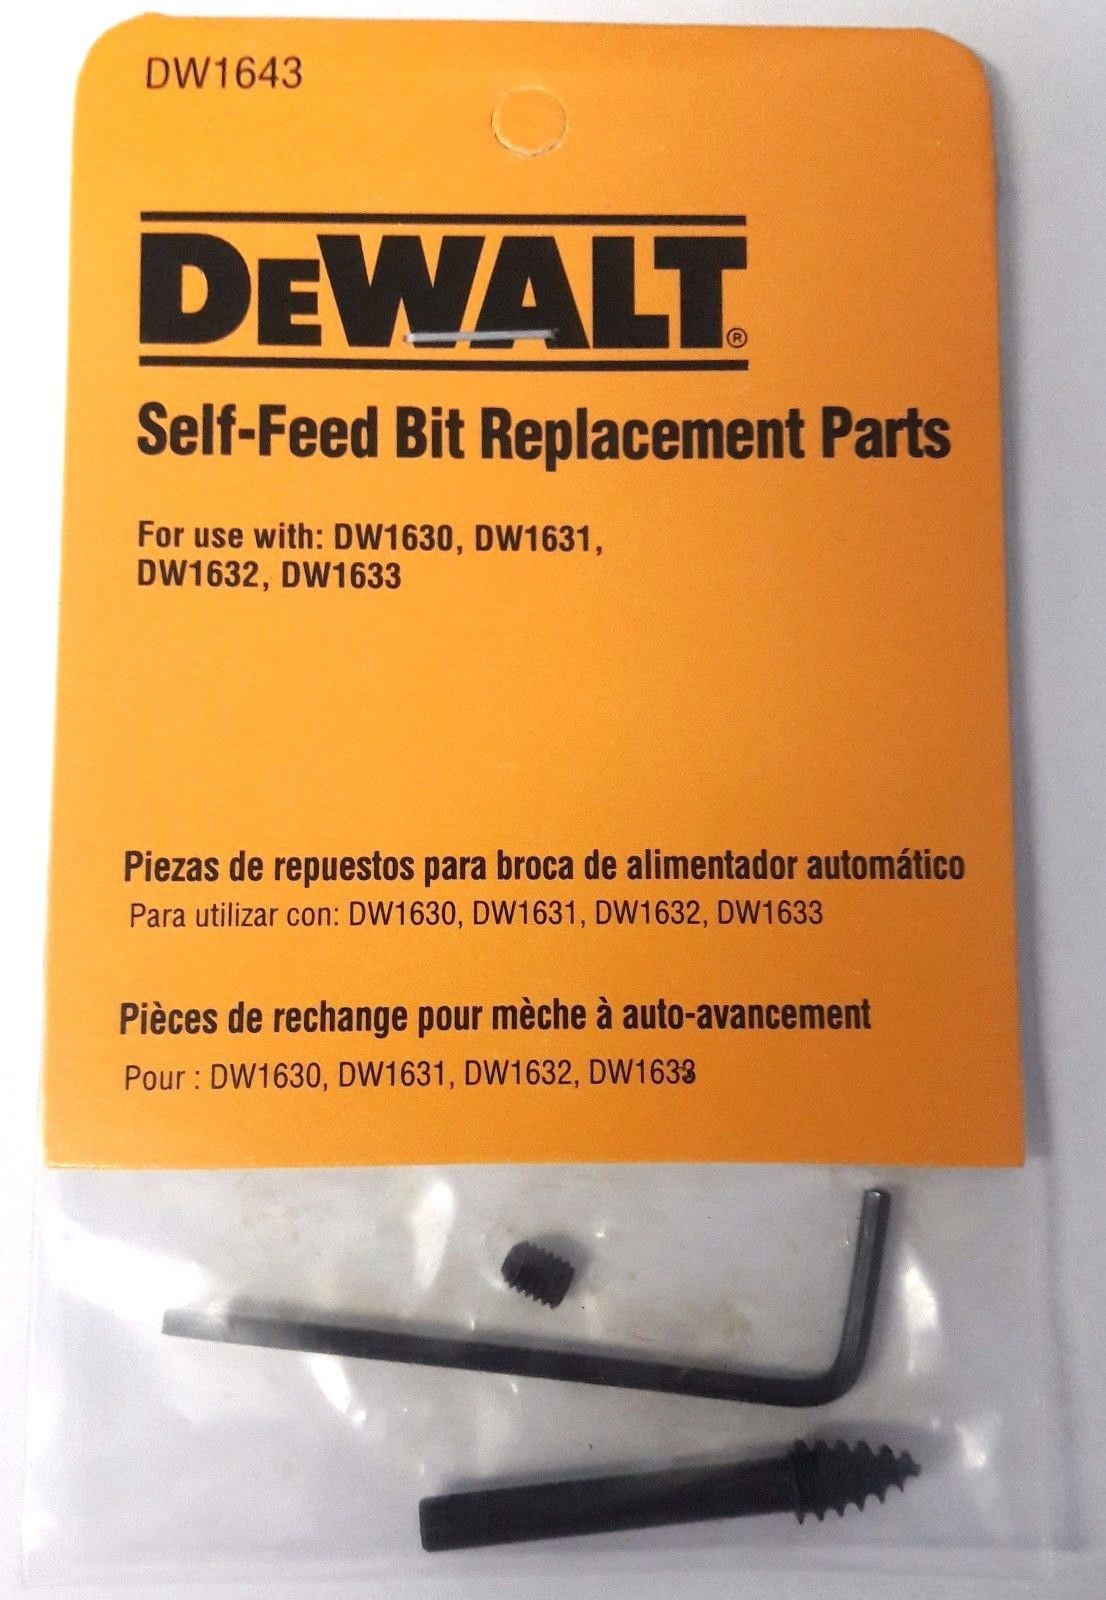 Dewalt DW1643 Self-Feed Bit Replacement Parts for 1 to 1-3/8